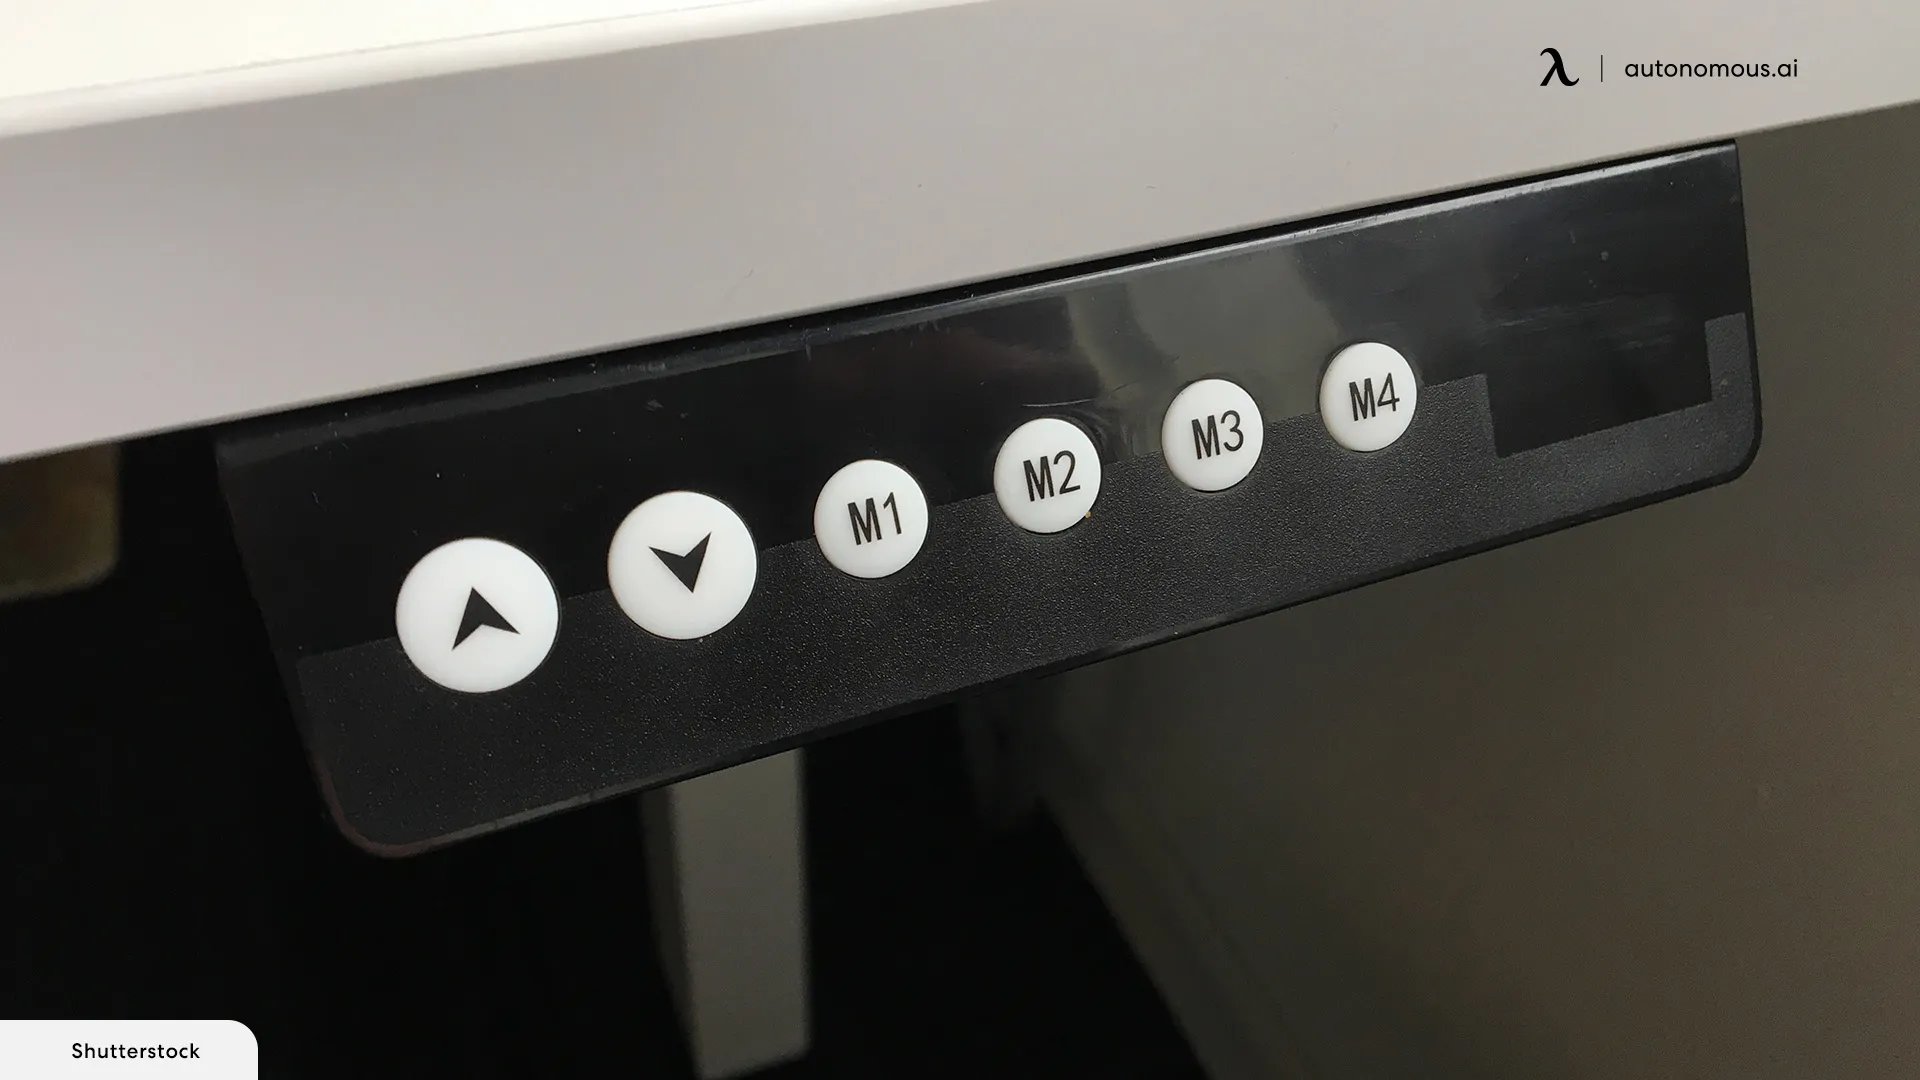 Standing Desk Controls Issue and How to Fix